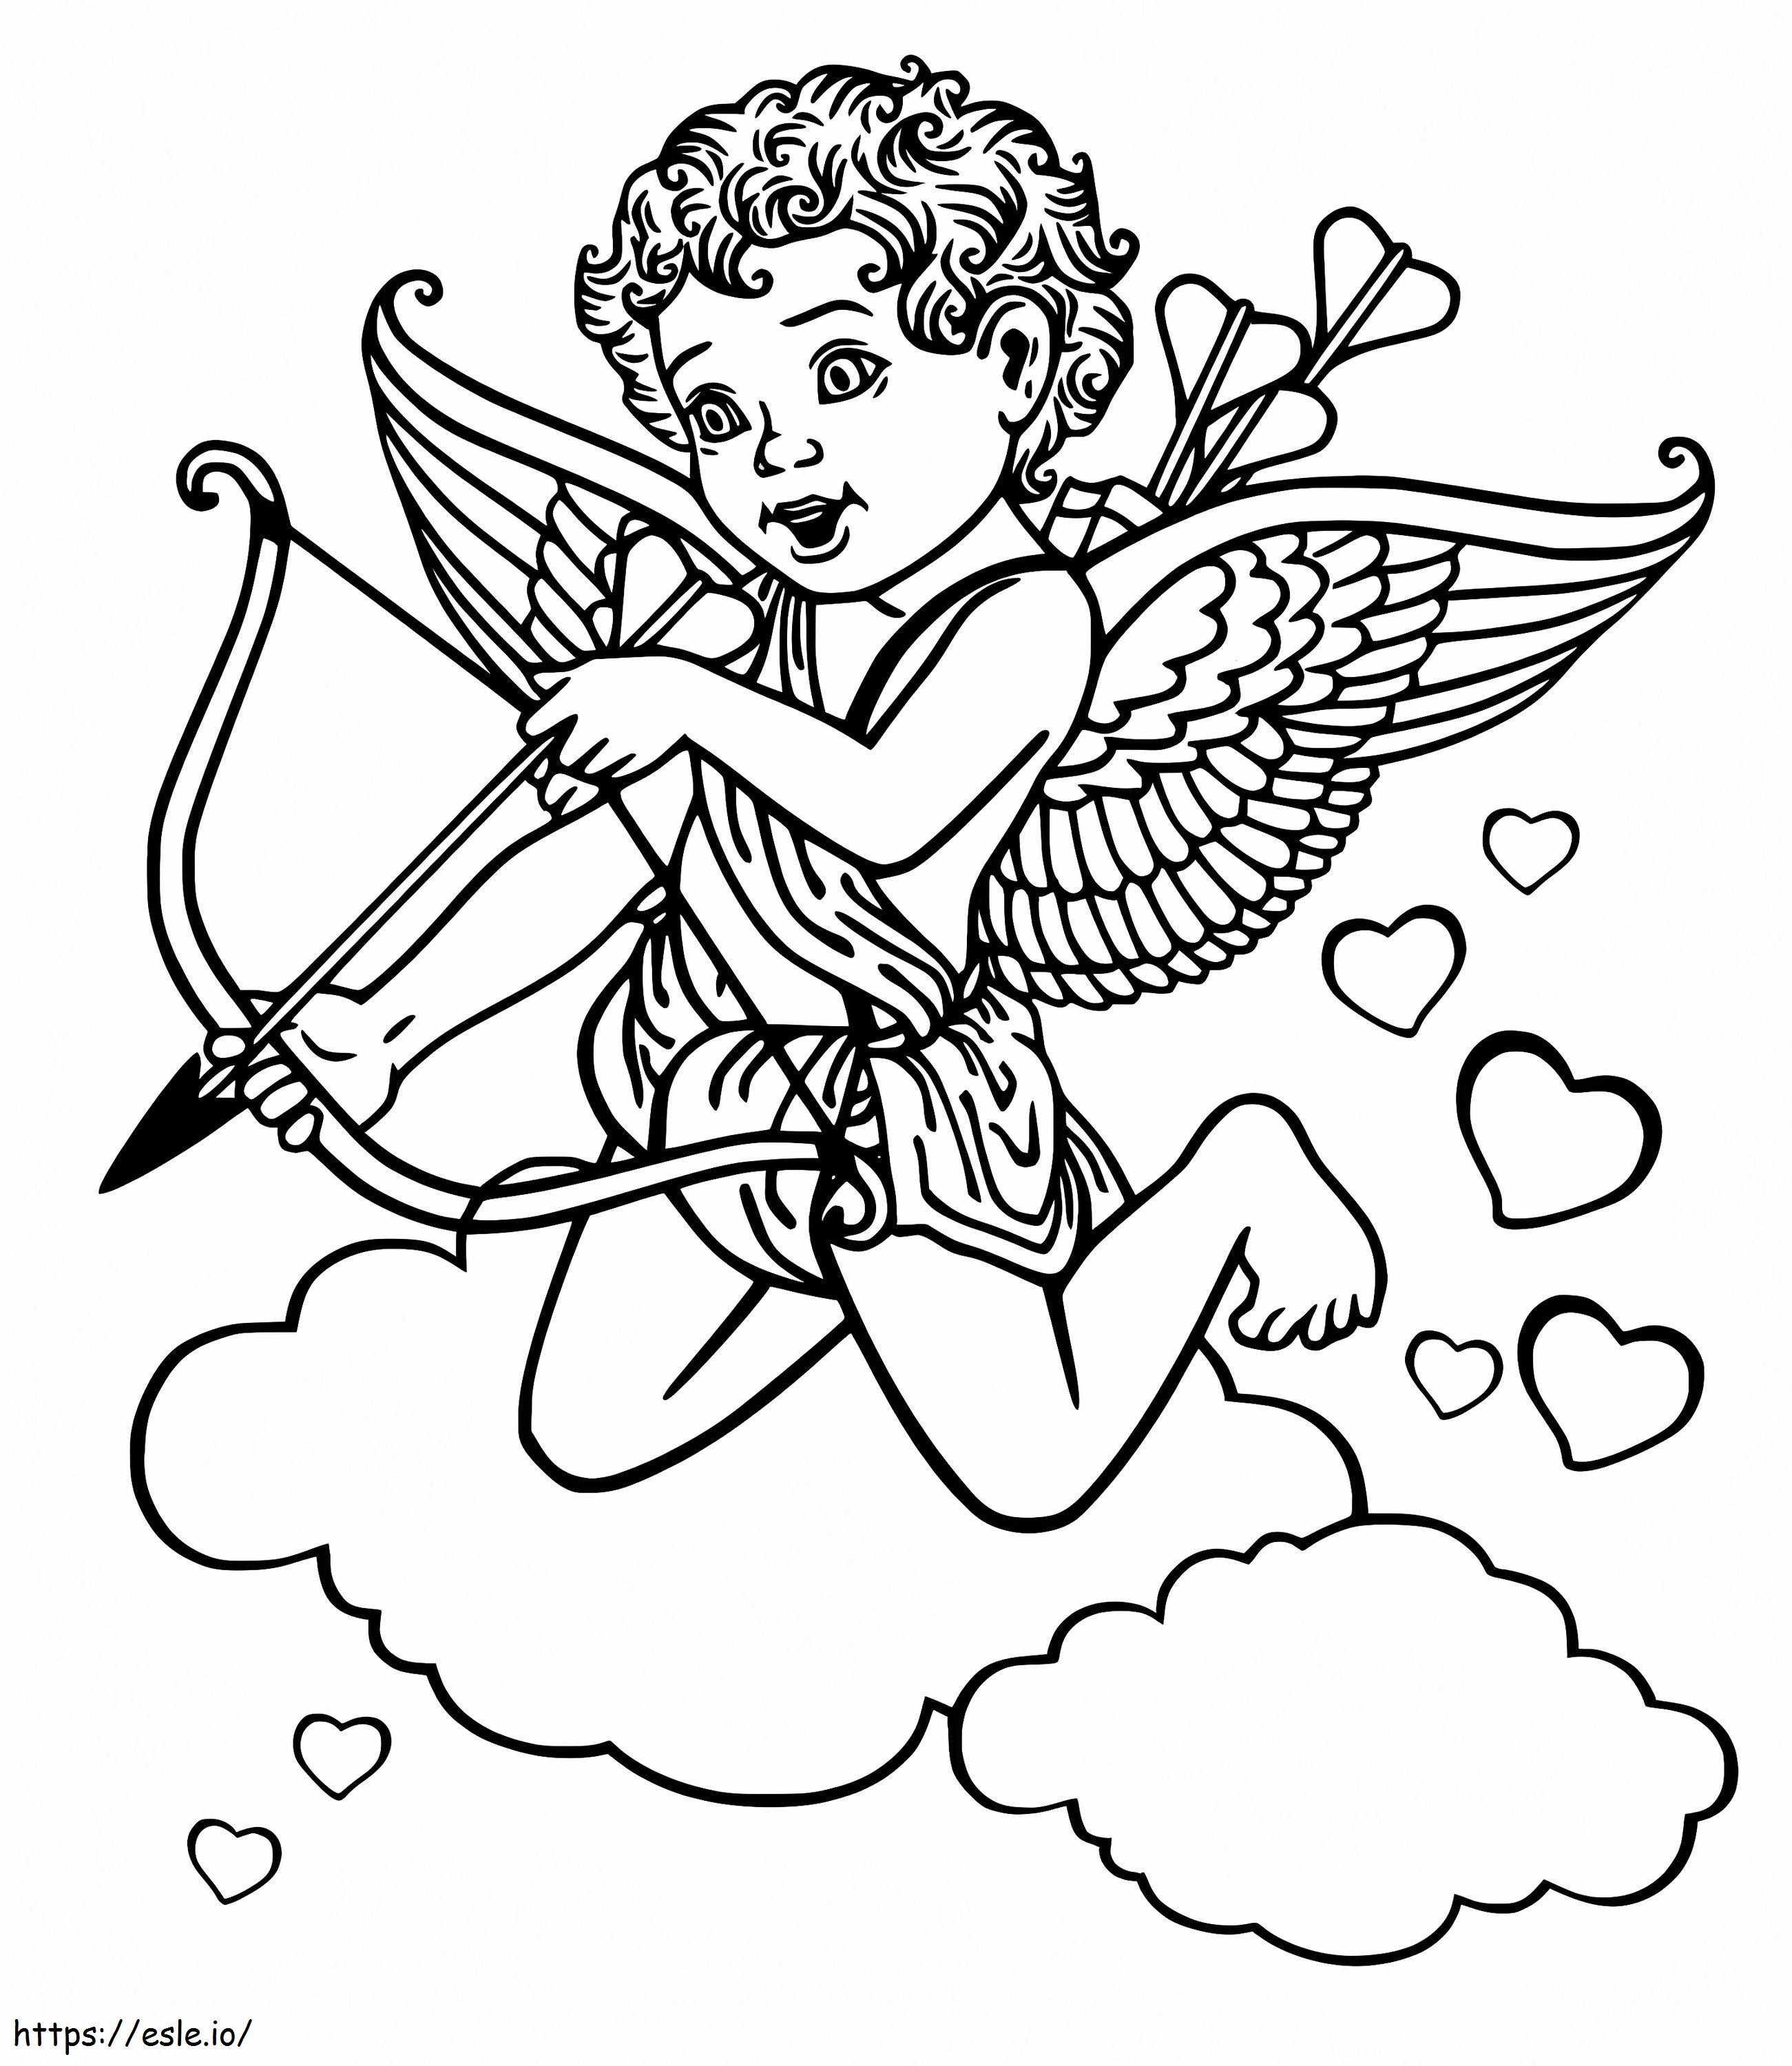 Amazing Cupid coloring page